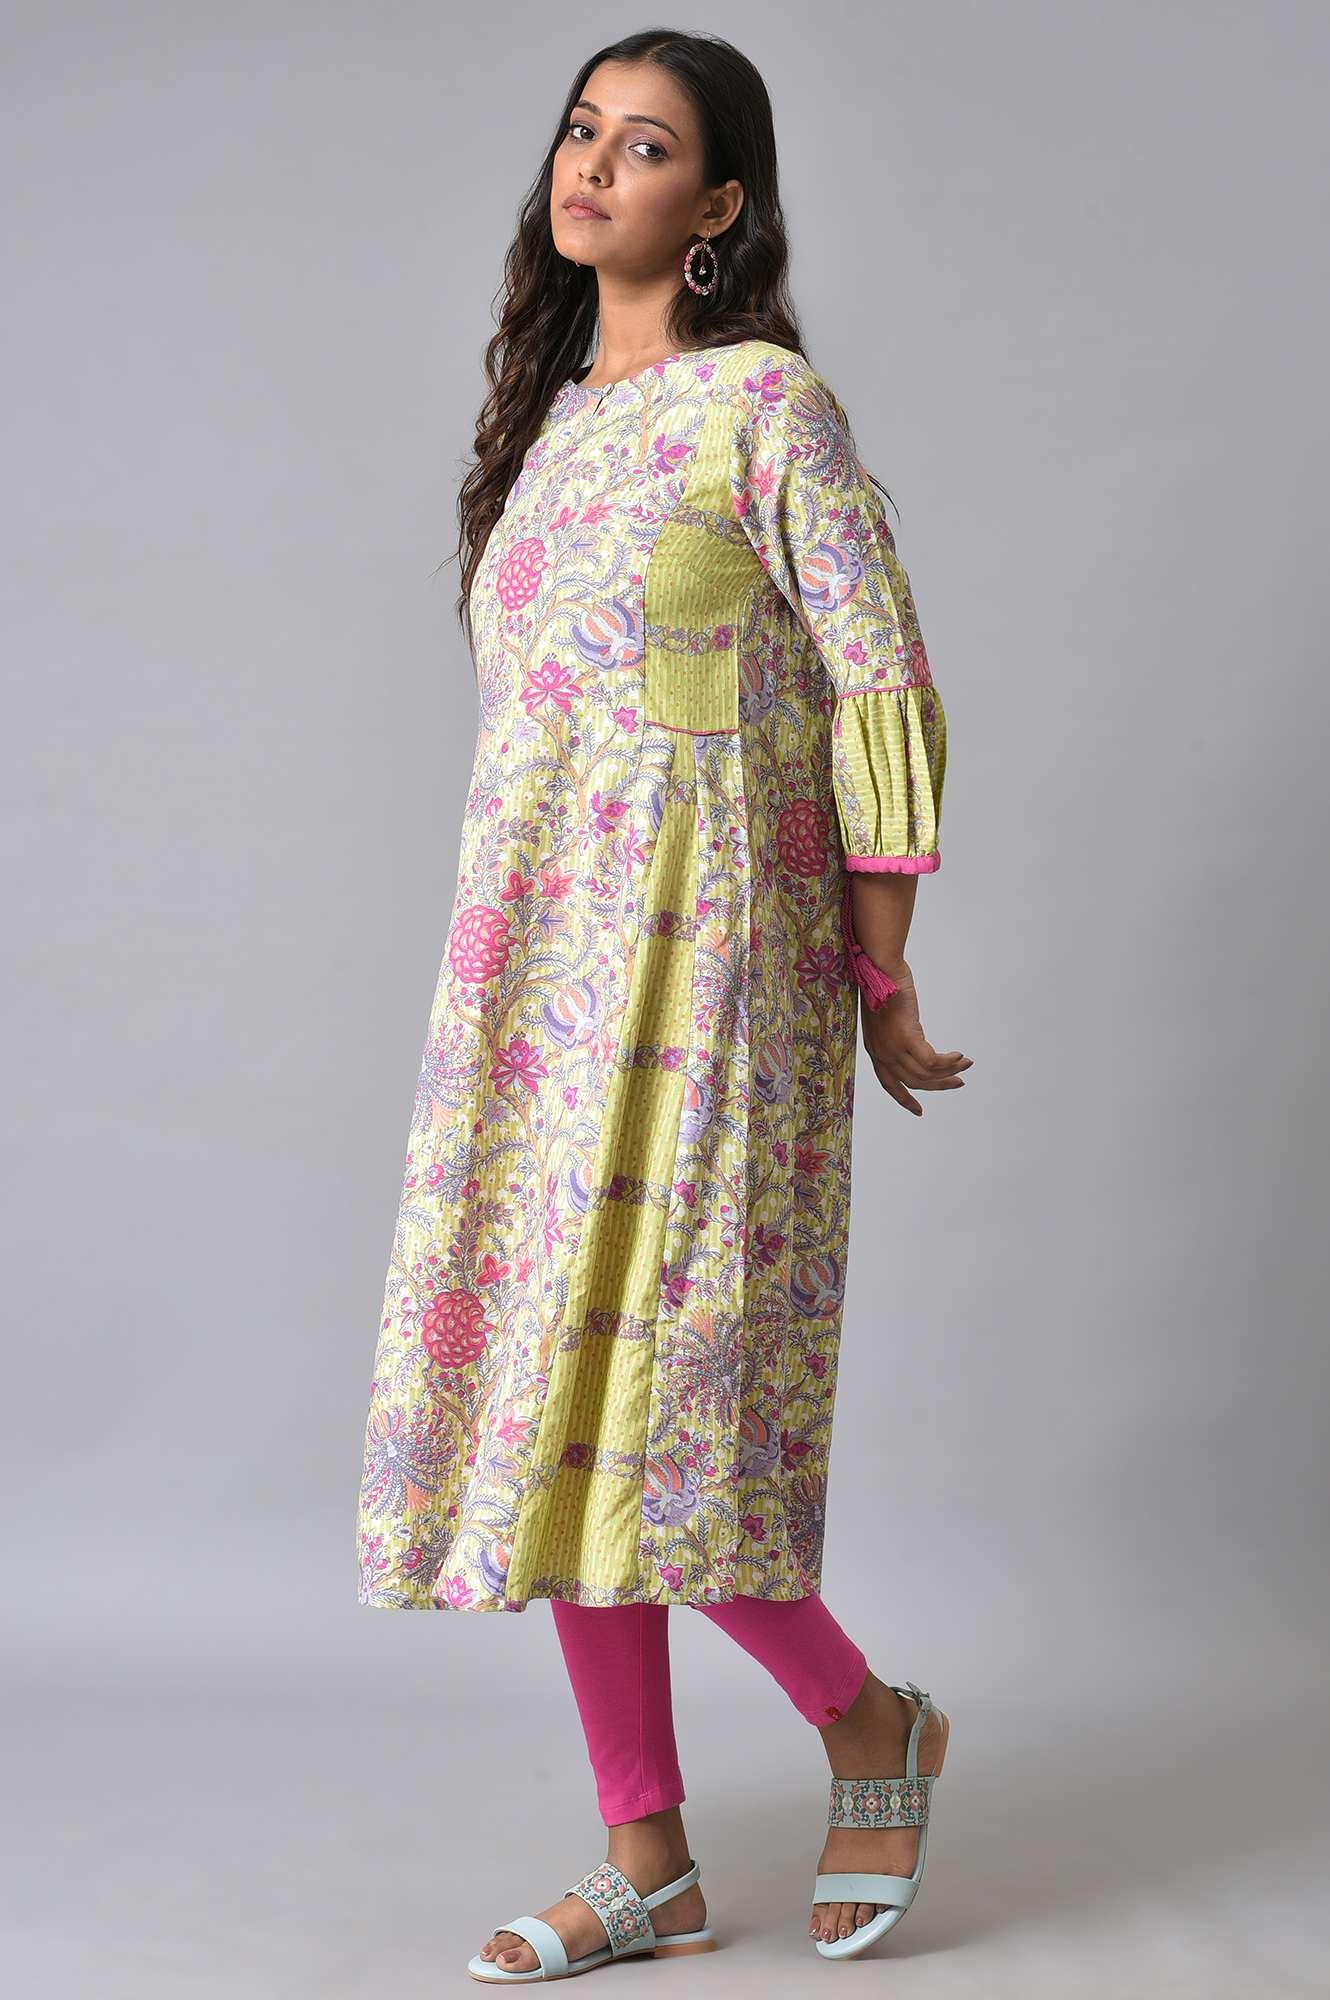 Green Printed Godget Summer Dress With Pink Tights - wforwoman